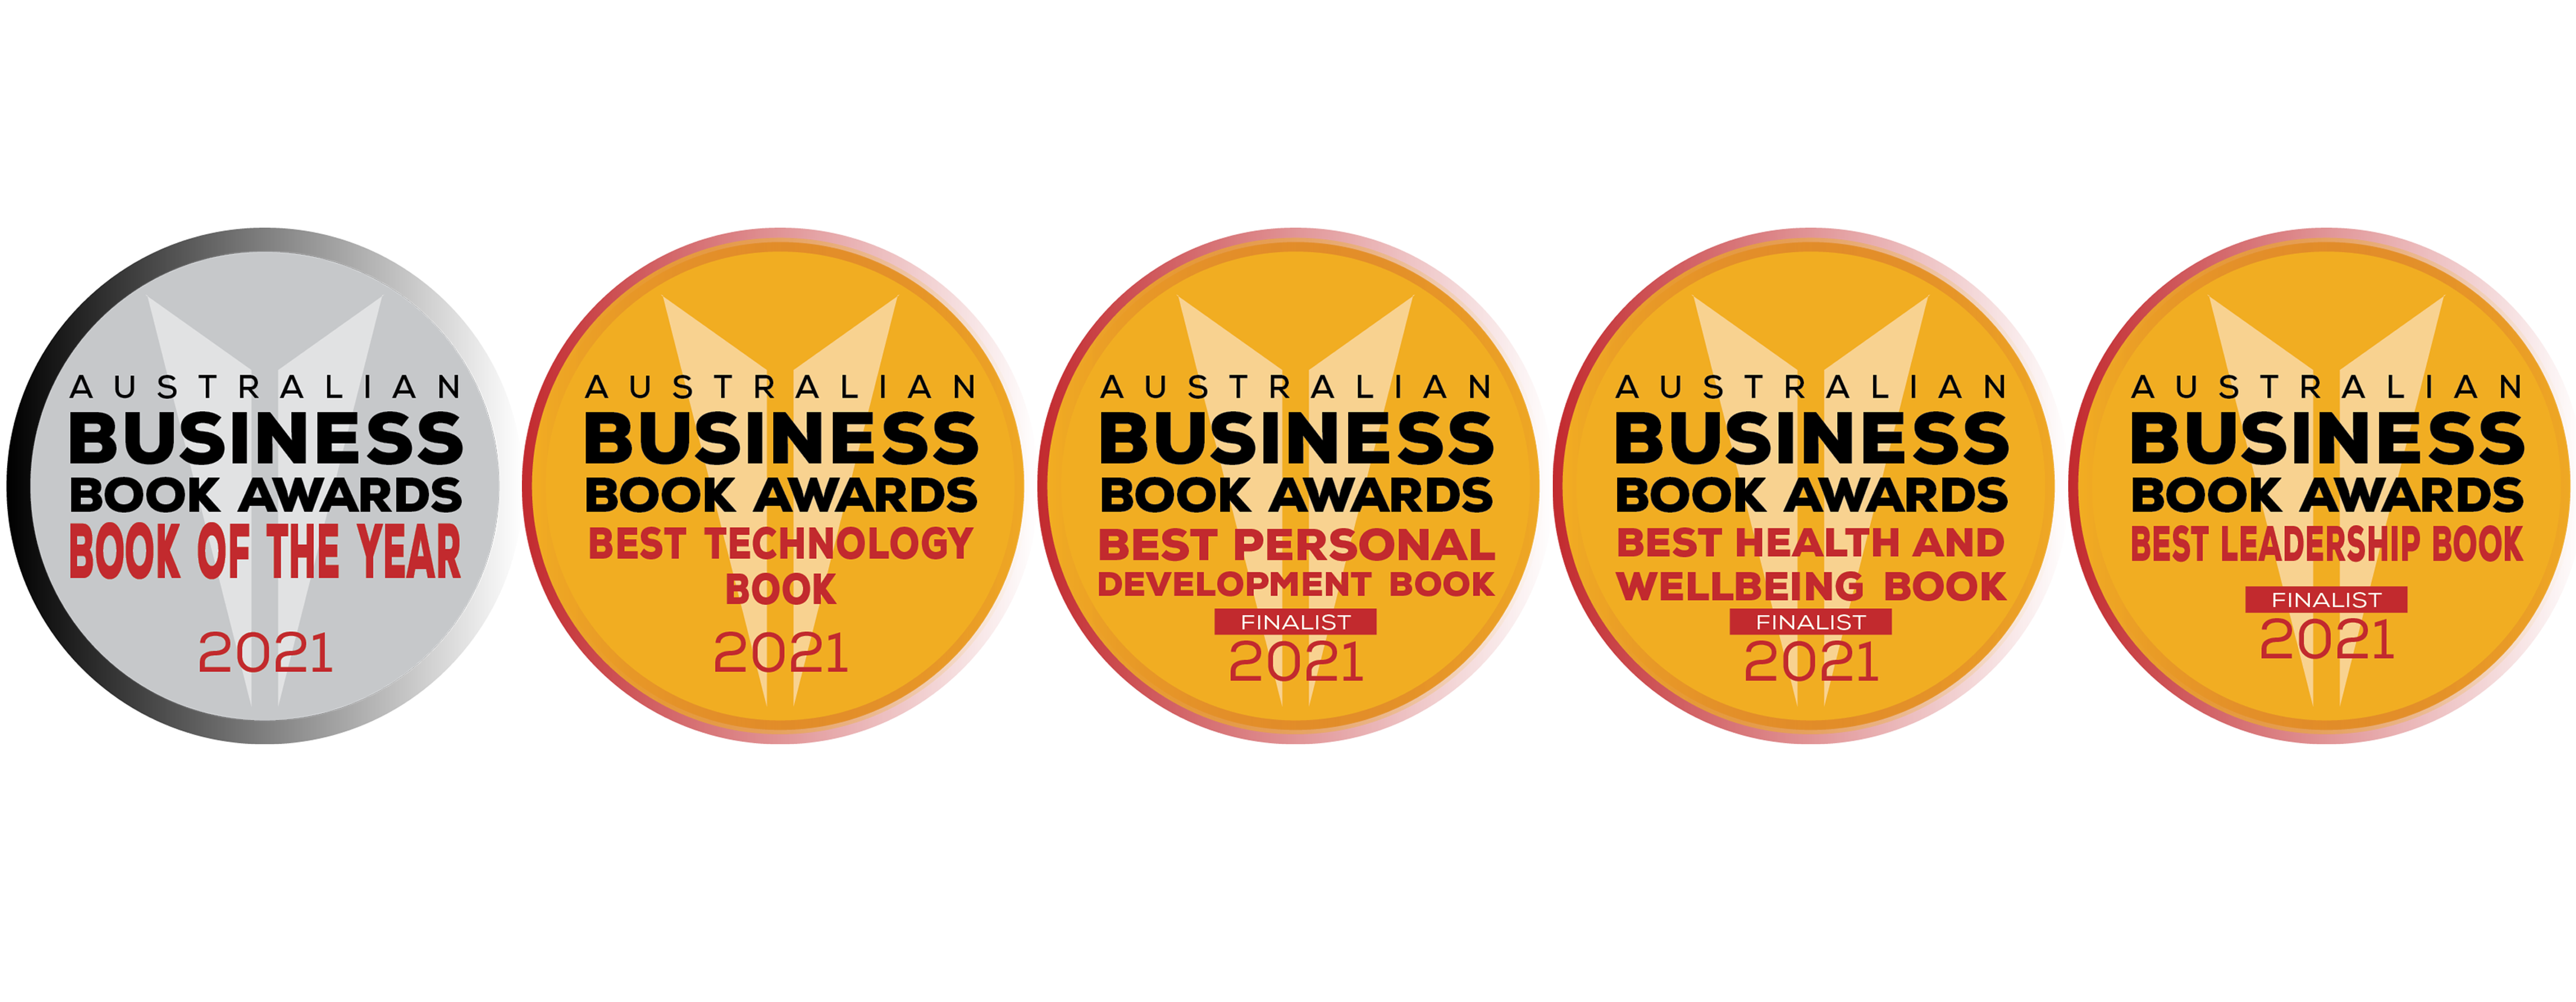 Publish Central book wins Business Book of the Year!